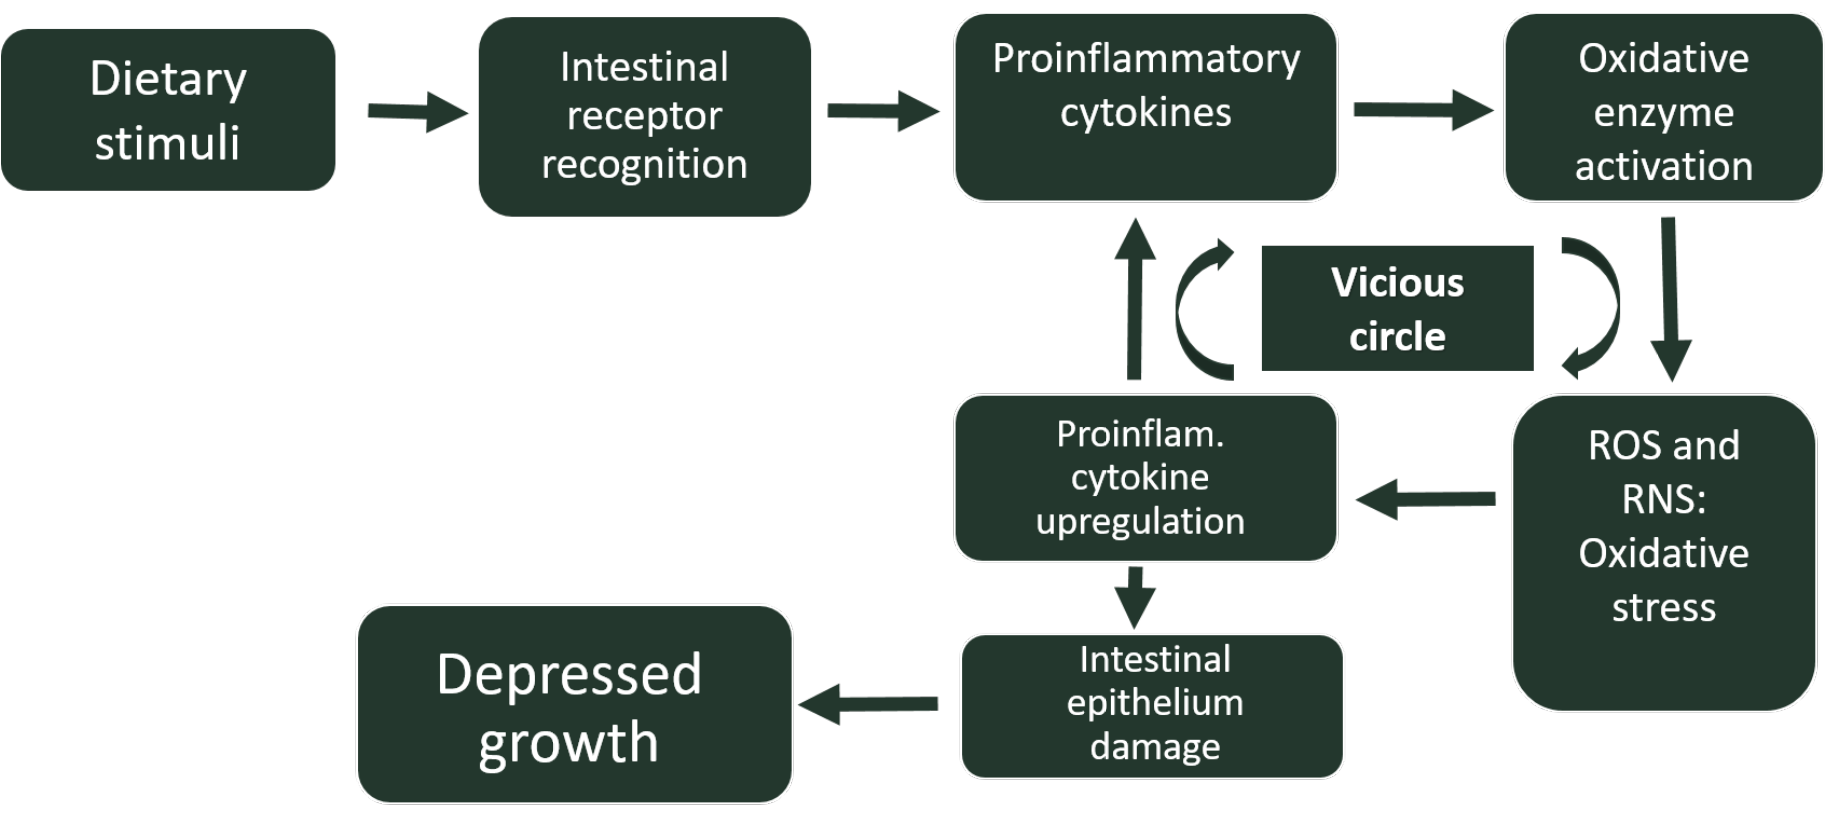 Figure 1. Feed-induced inflammation / oxidative stress vicious circle